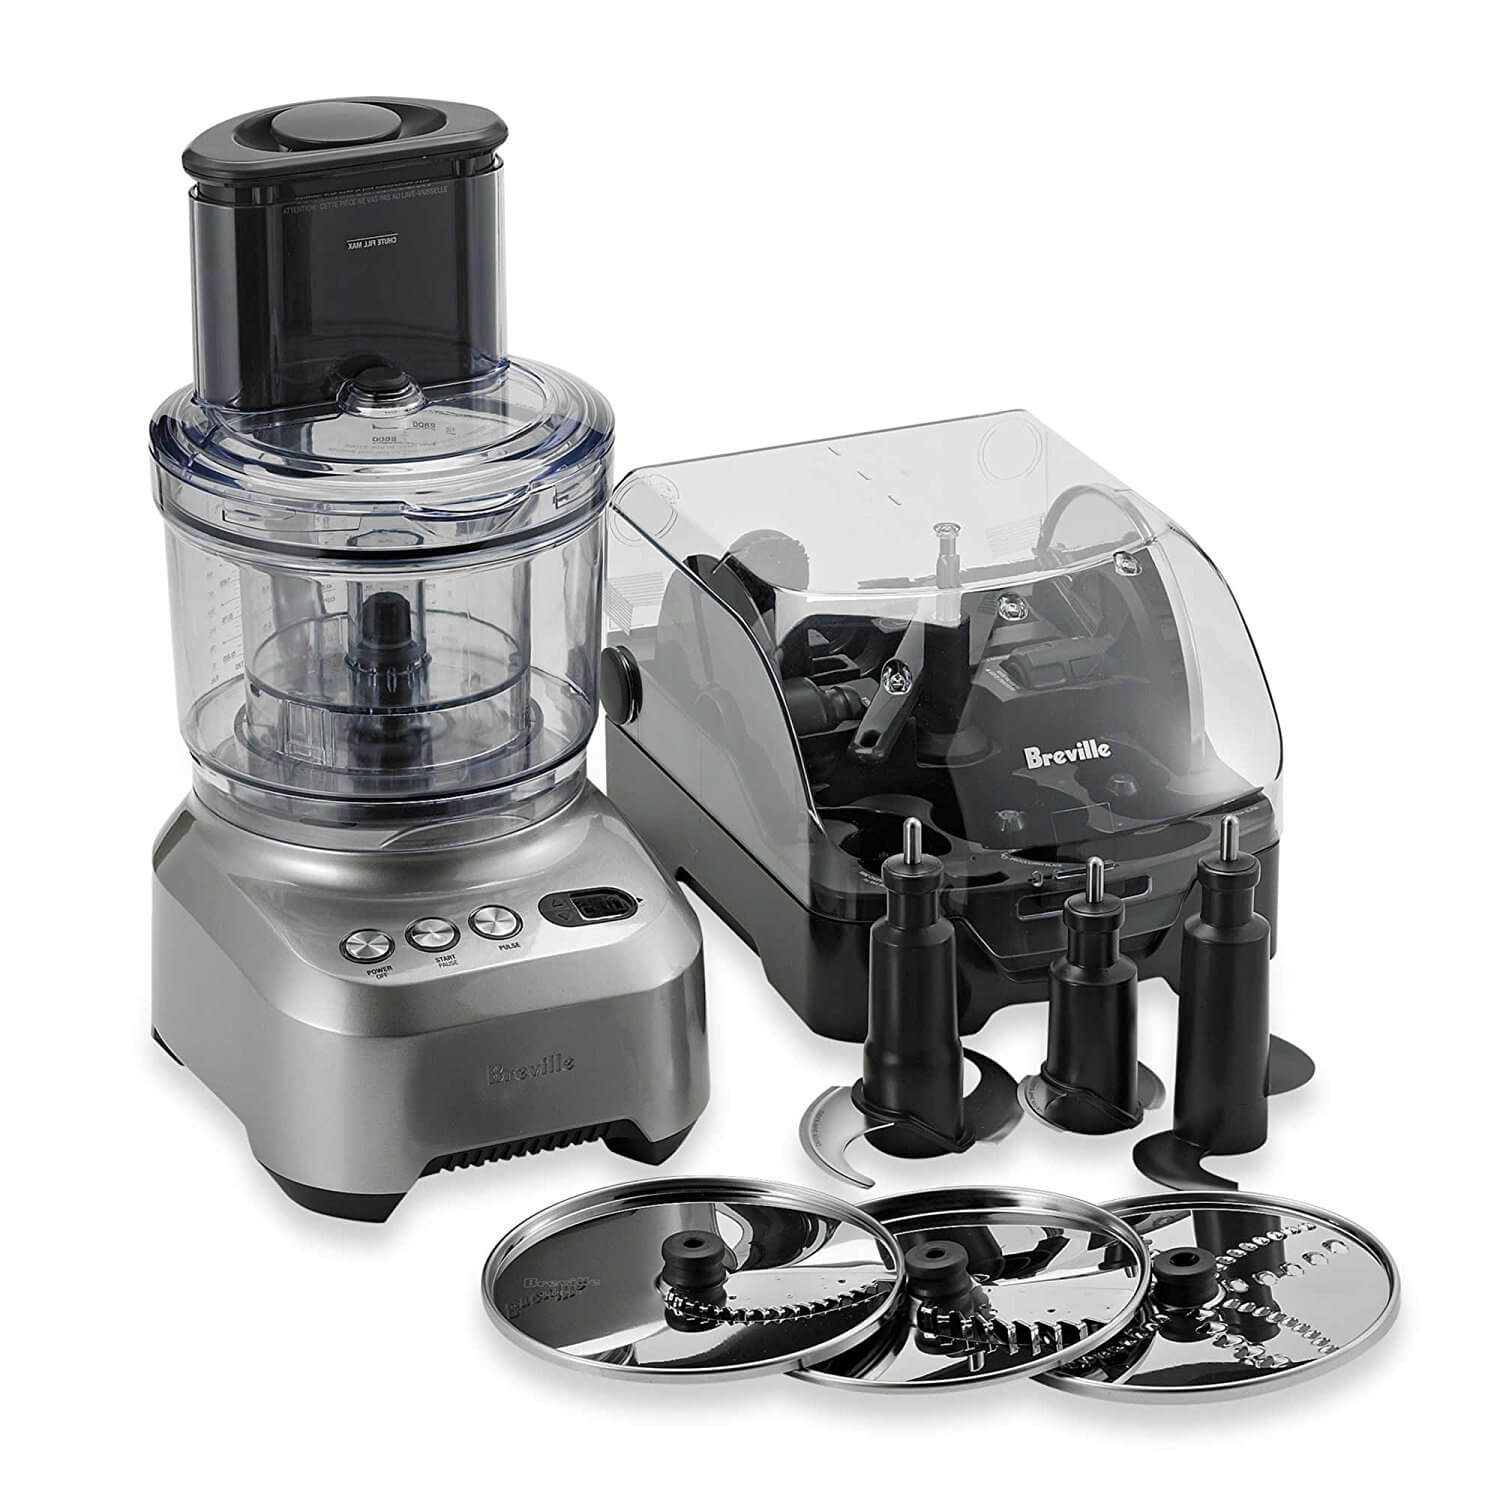 Breville Sous Chef Food Processor - Numerous Slicing, Dicing, Chopping & Kneading Options 